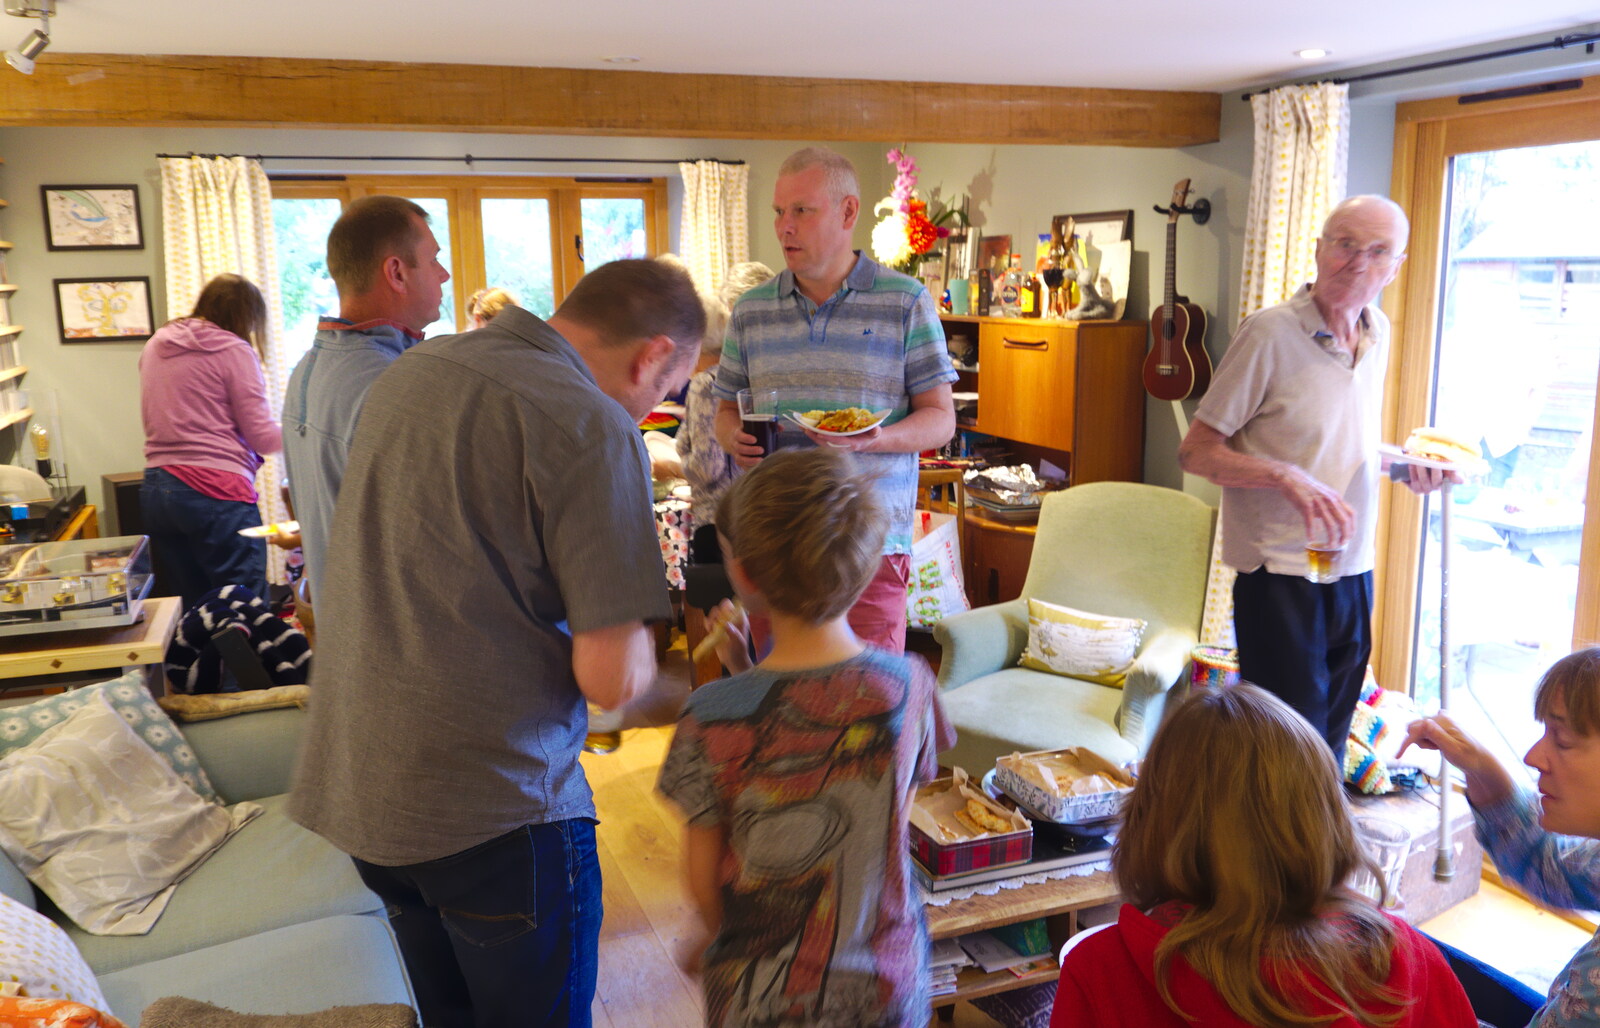 Grandad roams around in the dining room from A Summer Party, Brome, Suffolk - 3rd August 2019